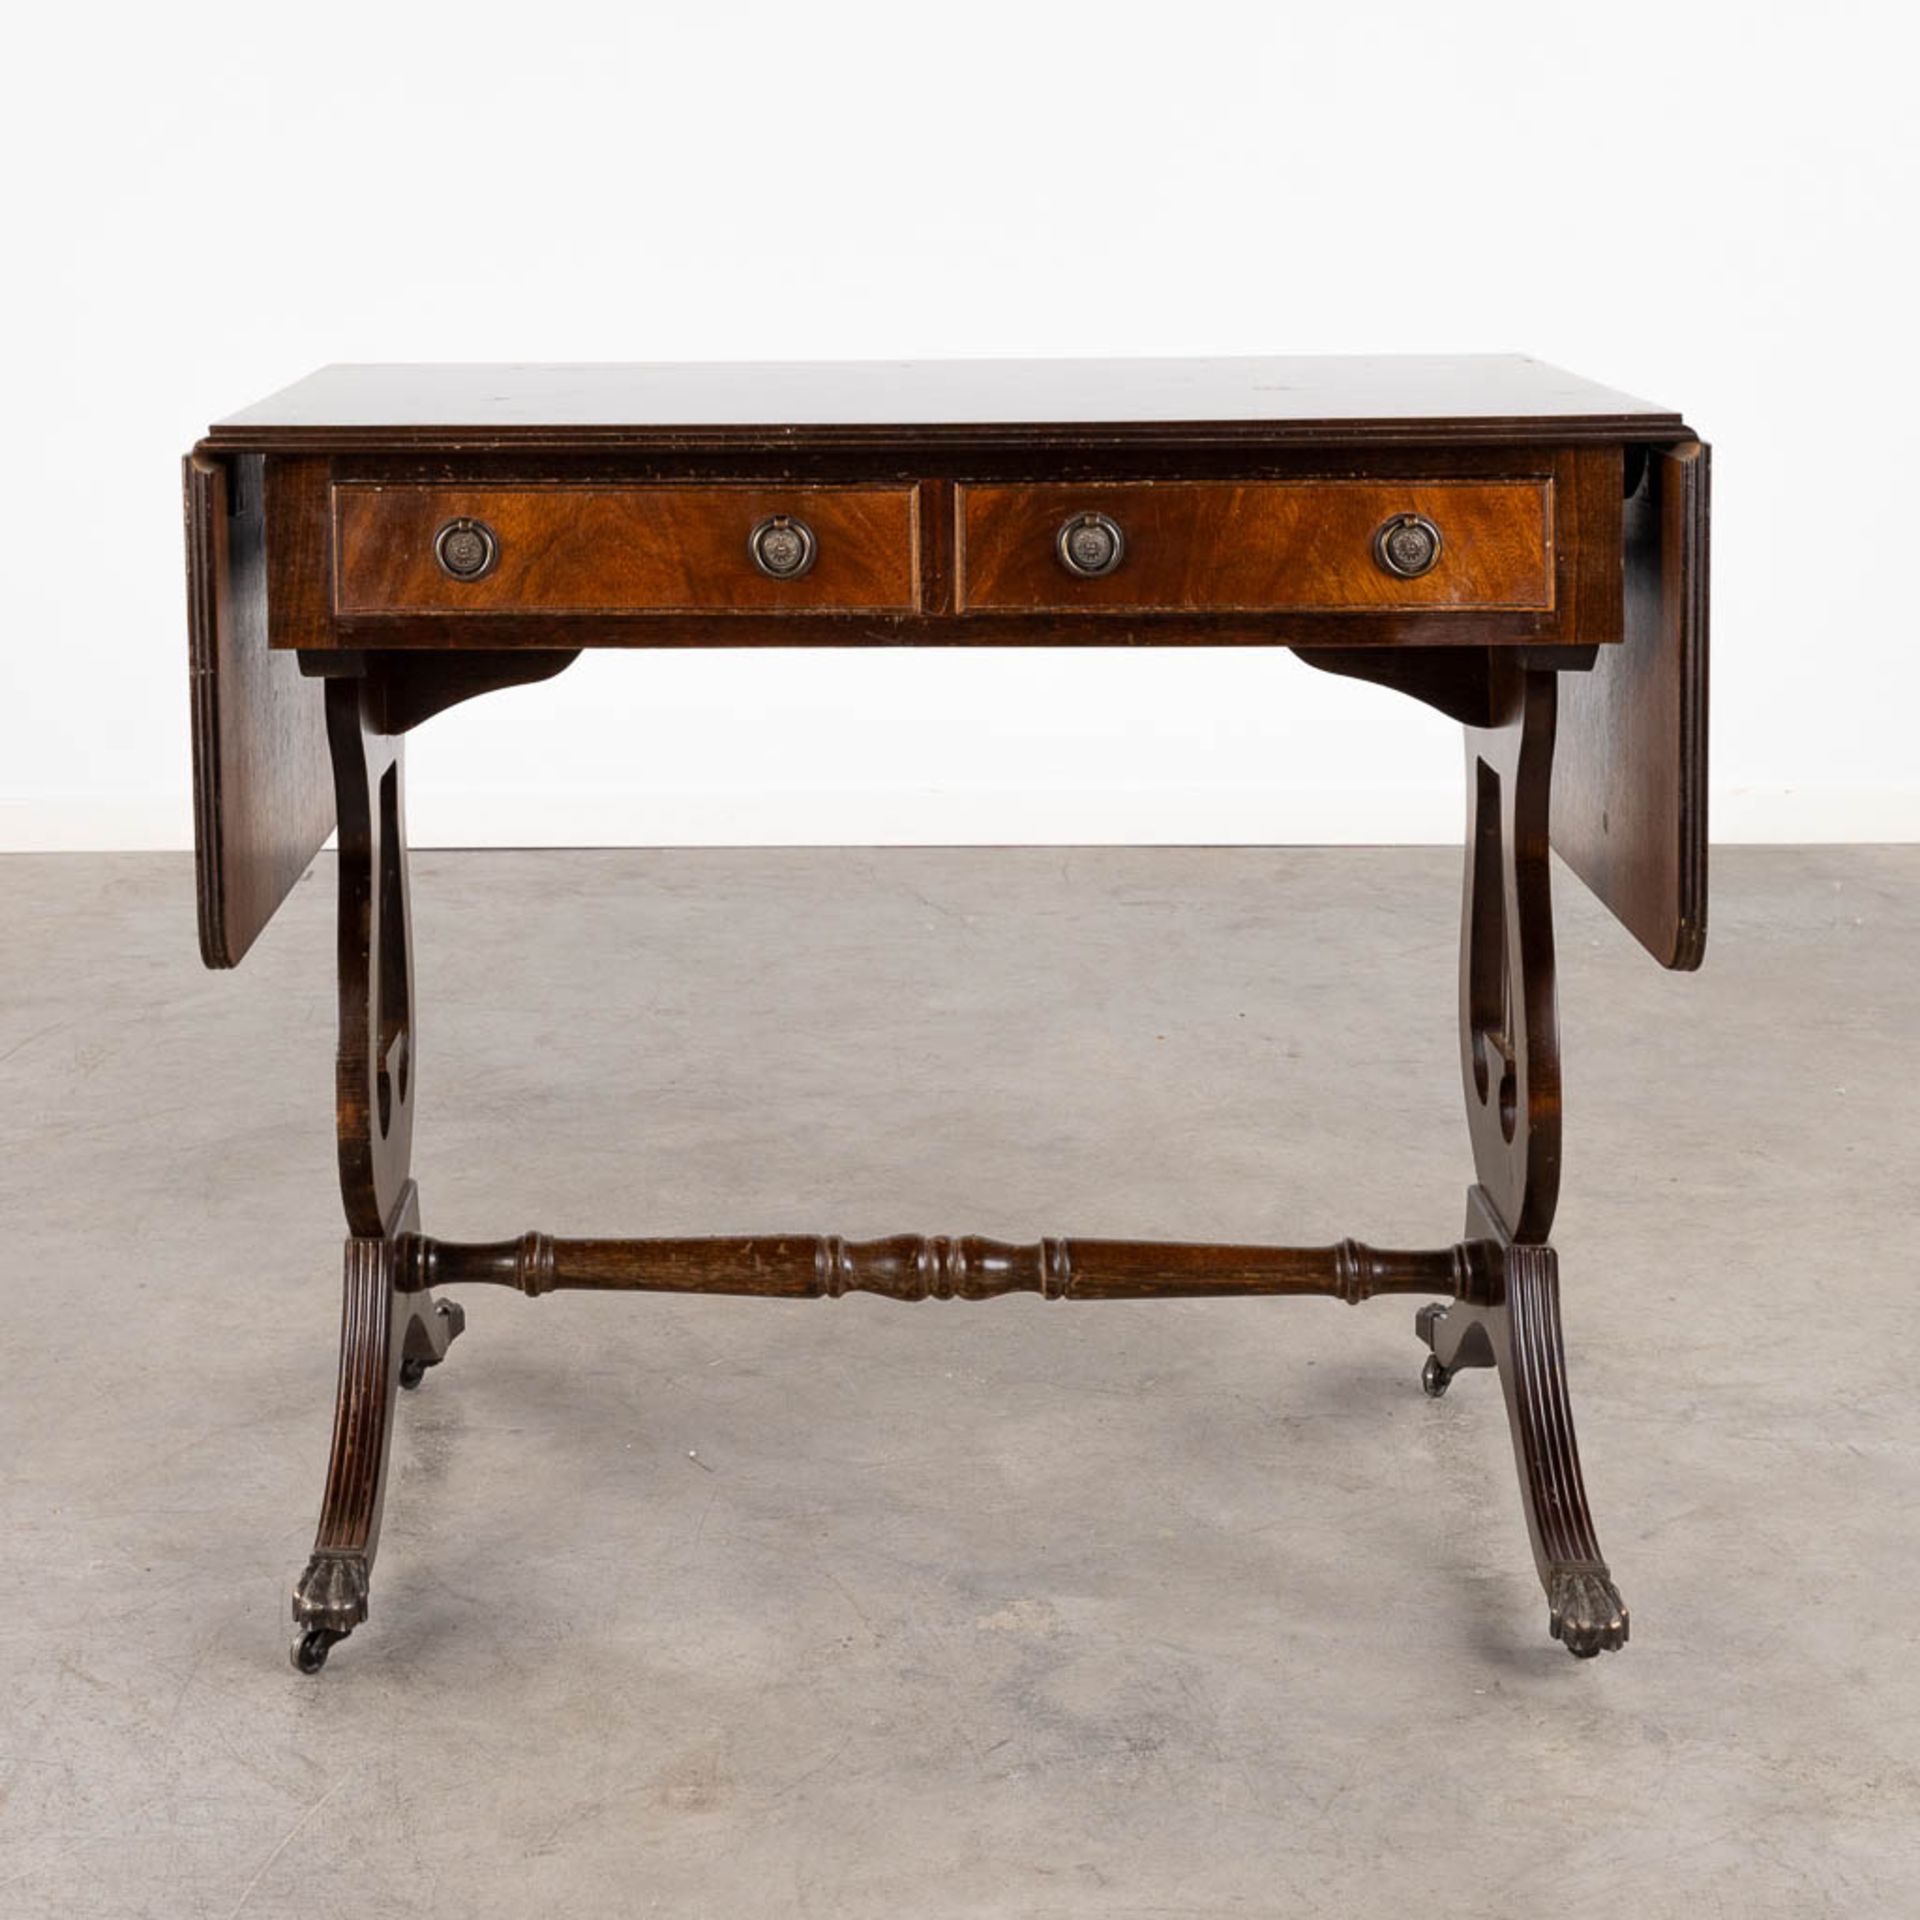 An English drop-leaf desk, decorated with a lire. 20th C. (D:51 x W:150 x H:75 cm) - Image 5 of 15